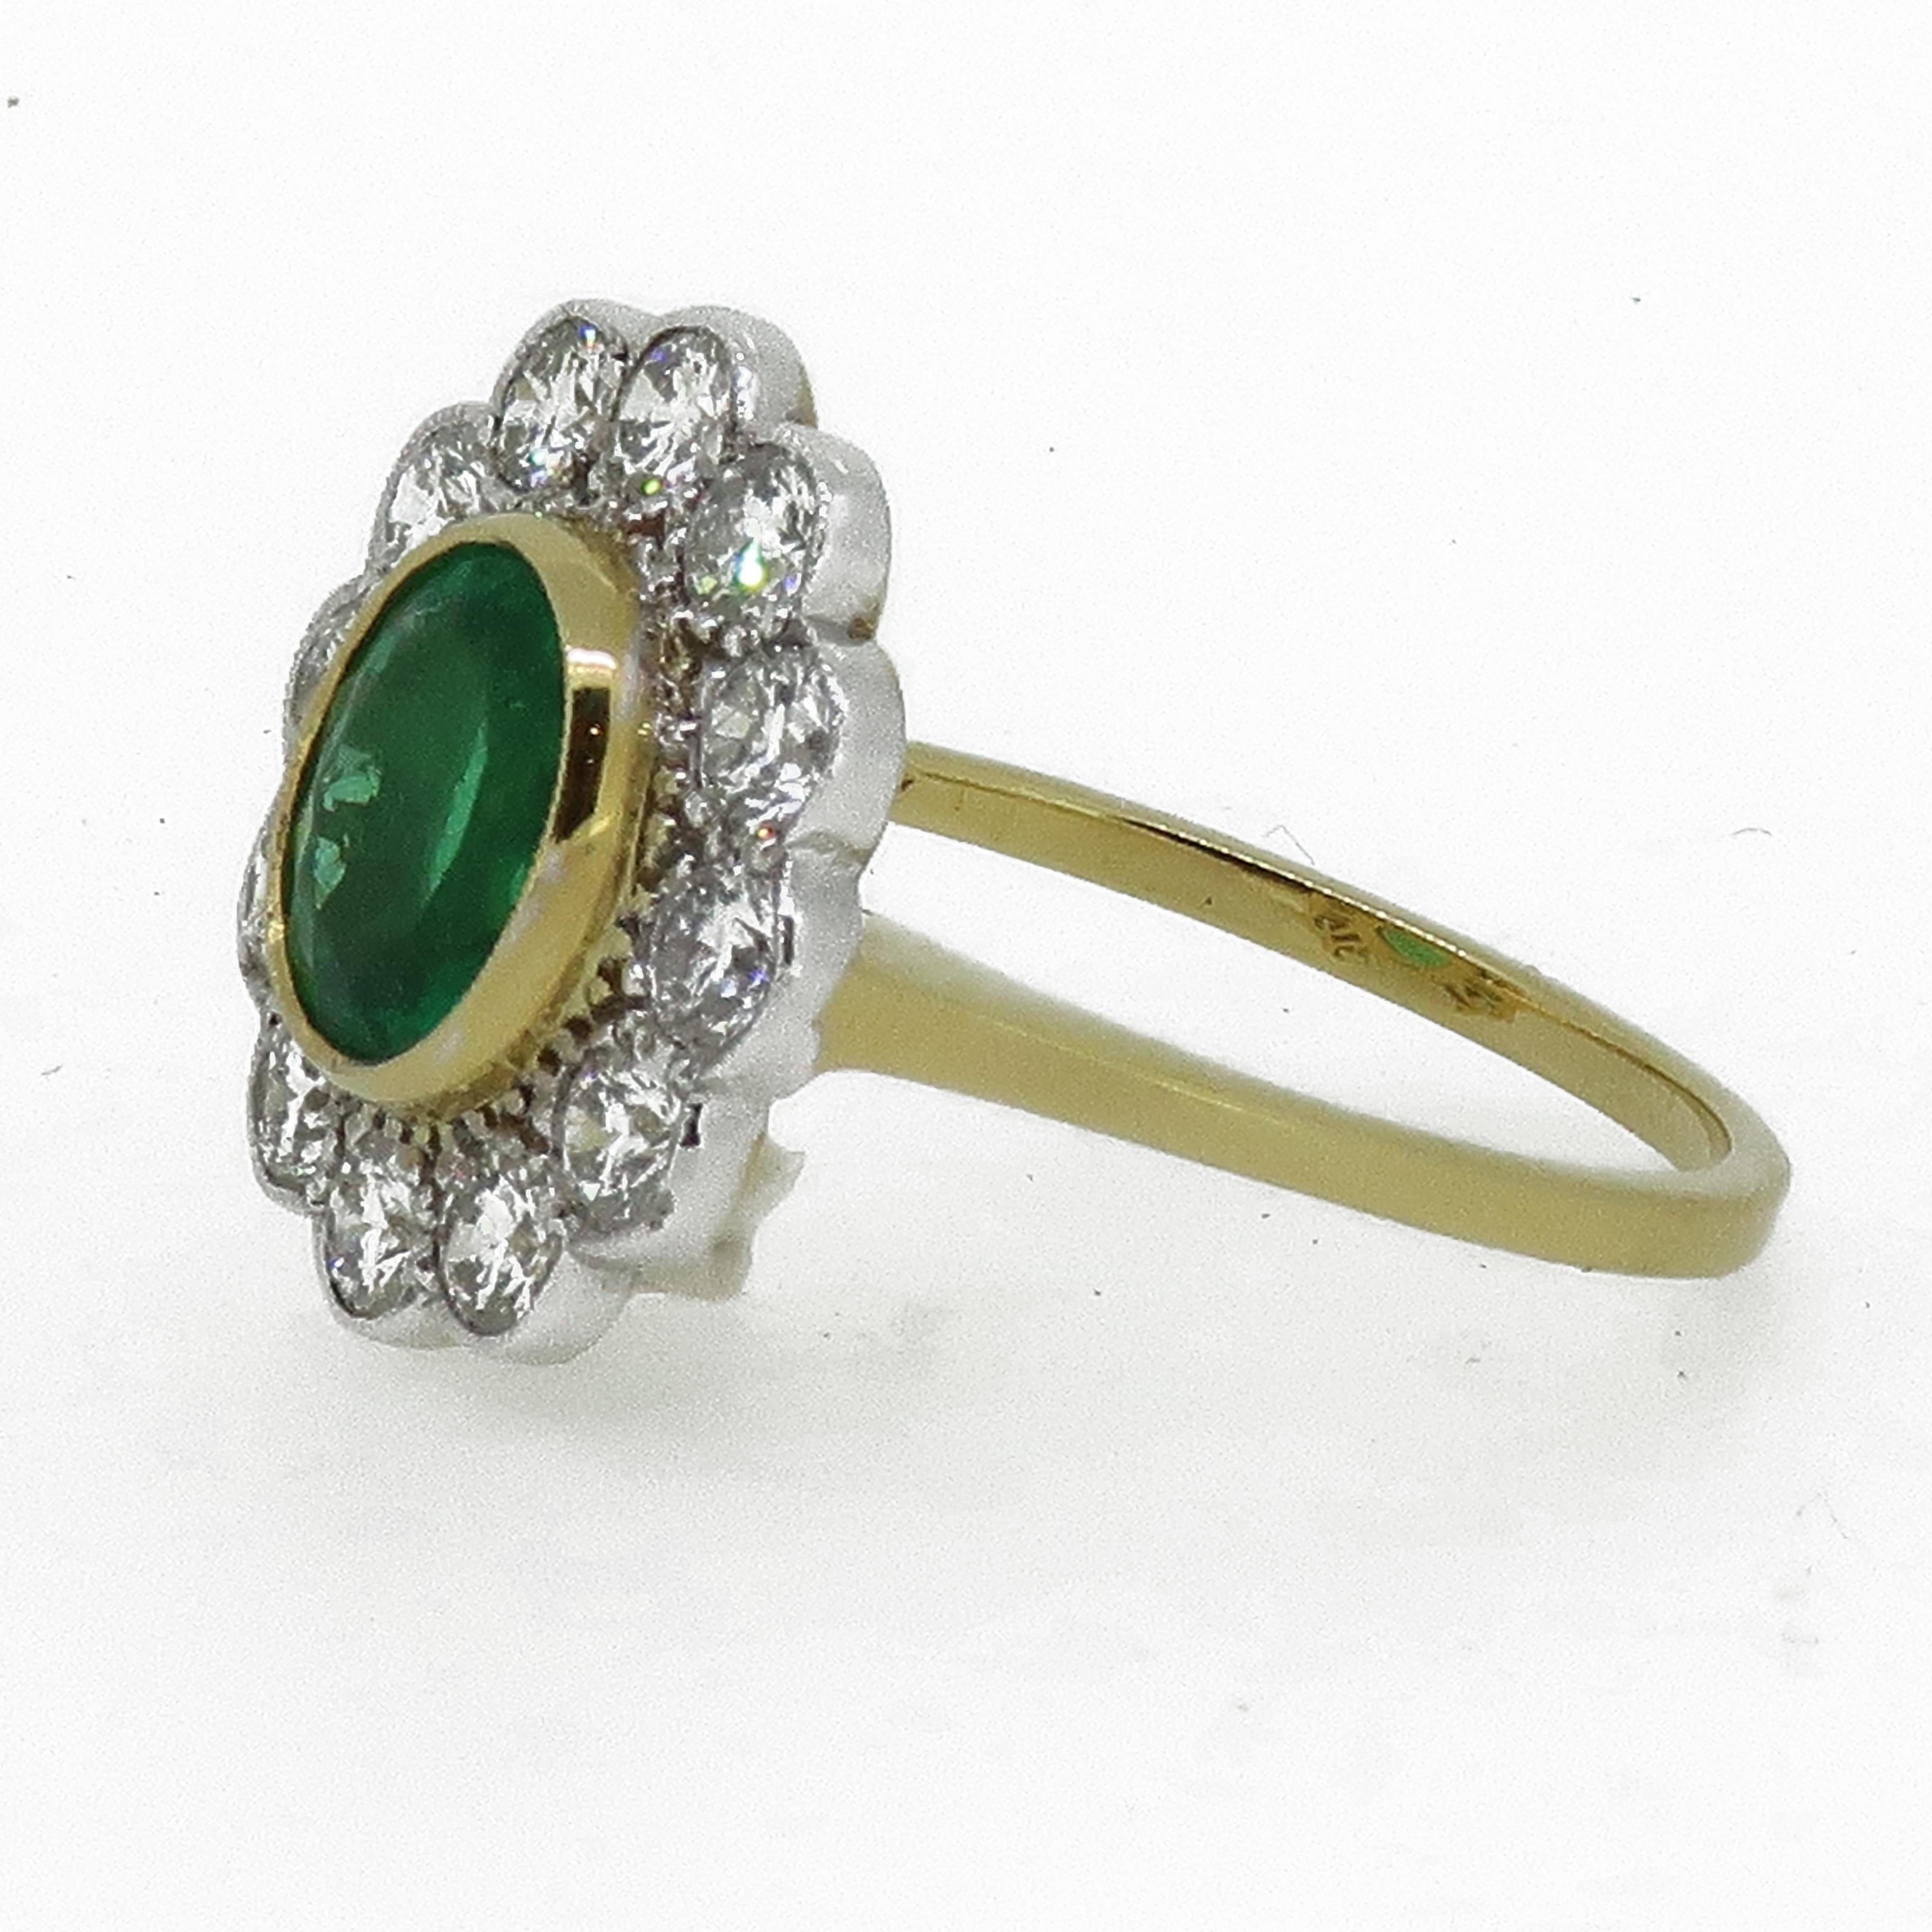 Oval Emerald and Diamond Cluster Ring 18 Karat Yellow And White Gold

Large classic handmade oval emerald and diamond cluster ring. The stunning vibrant green Columbian emerald is encased in an 18ct yellow gold bezel, surrounded by twelve white